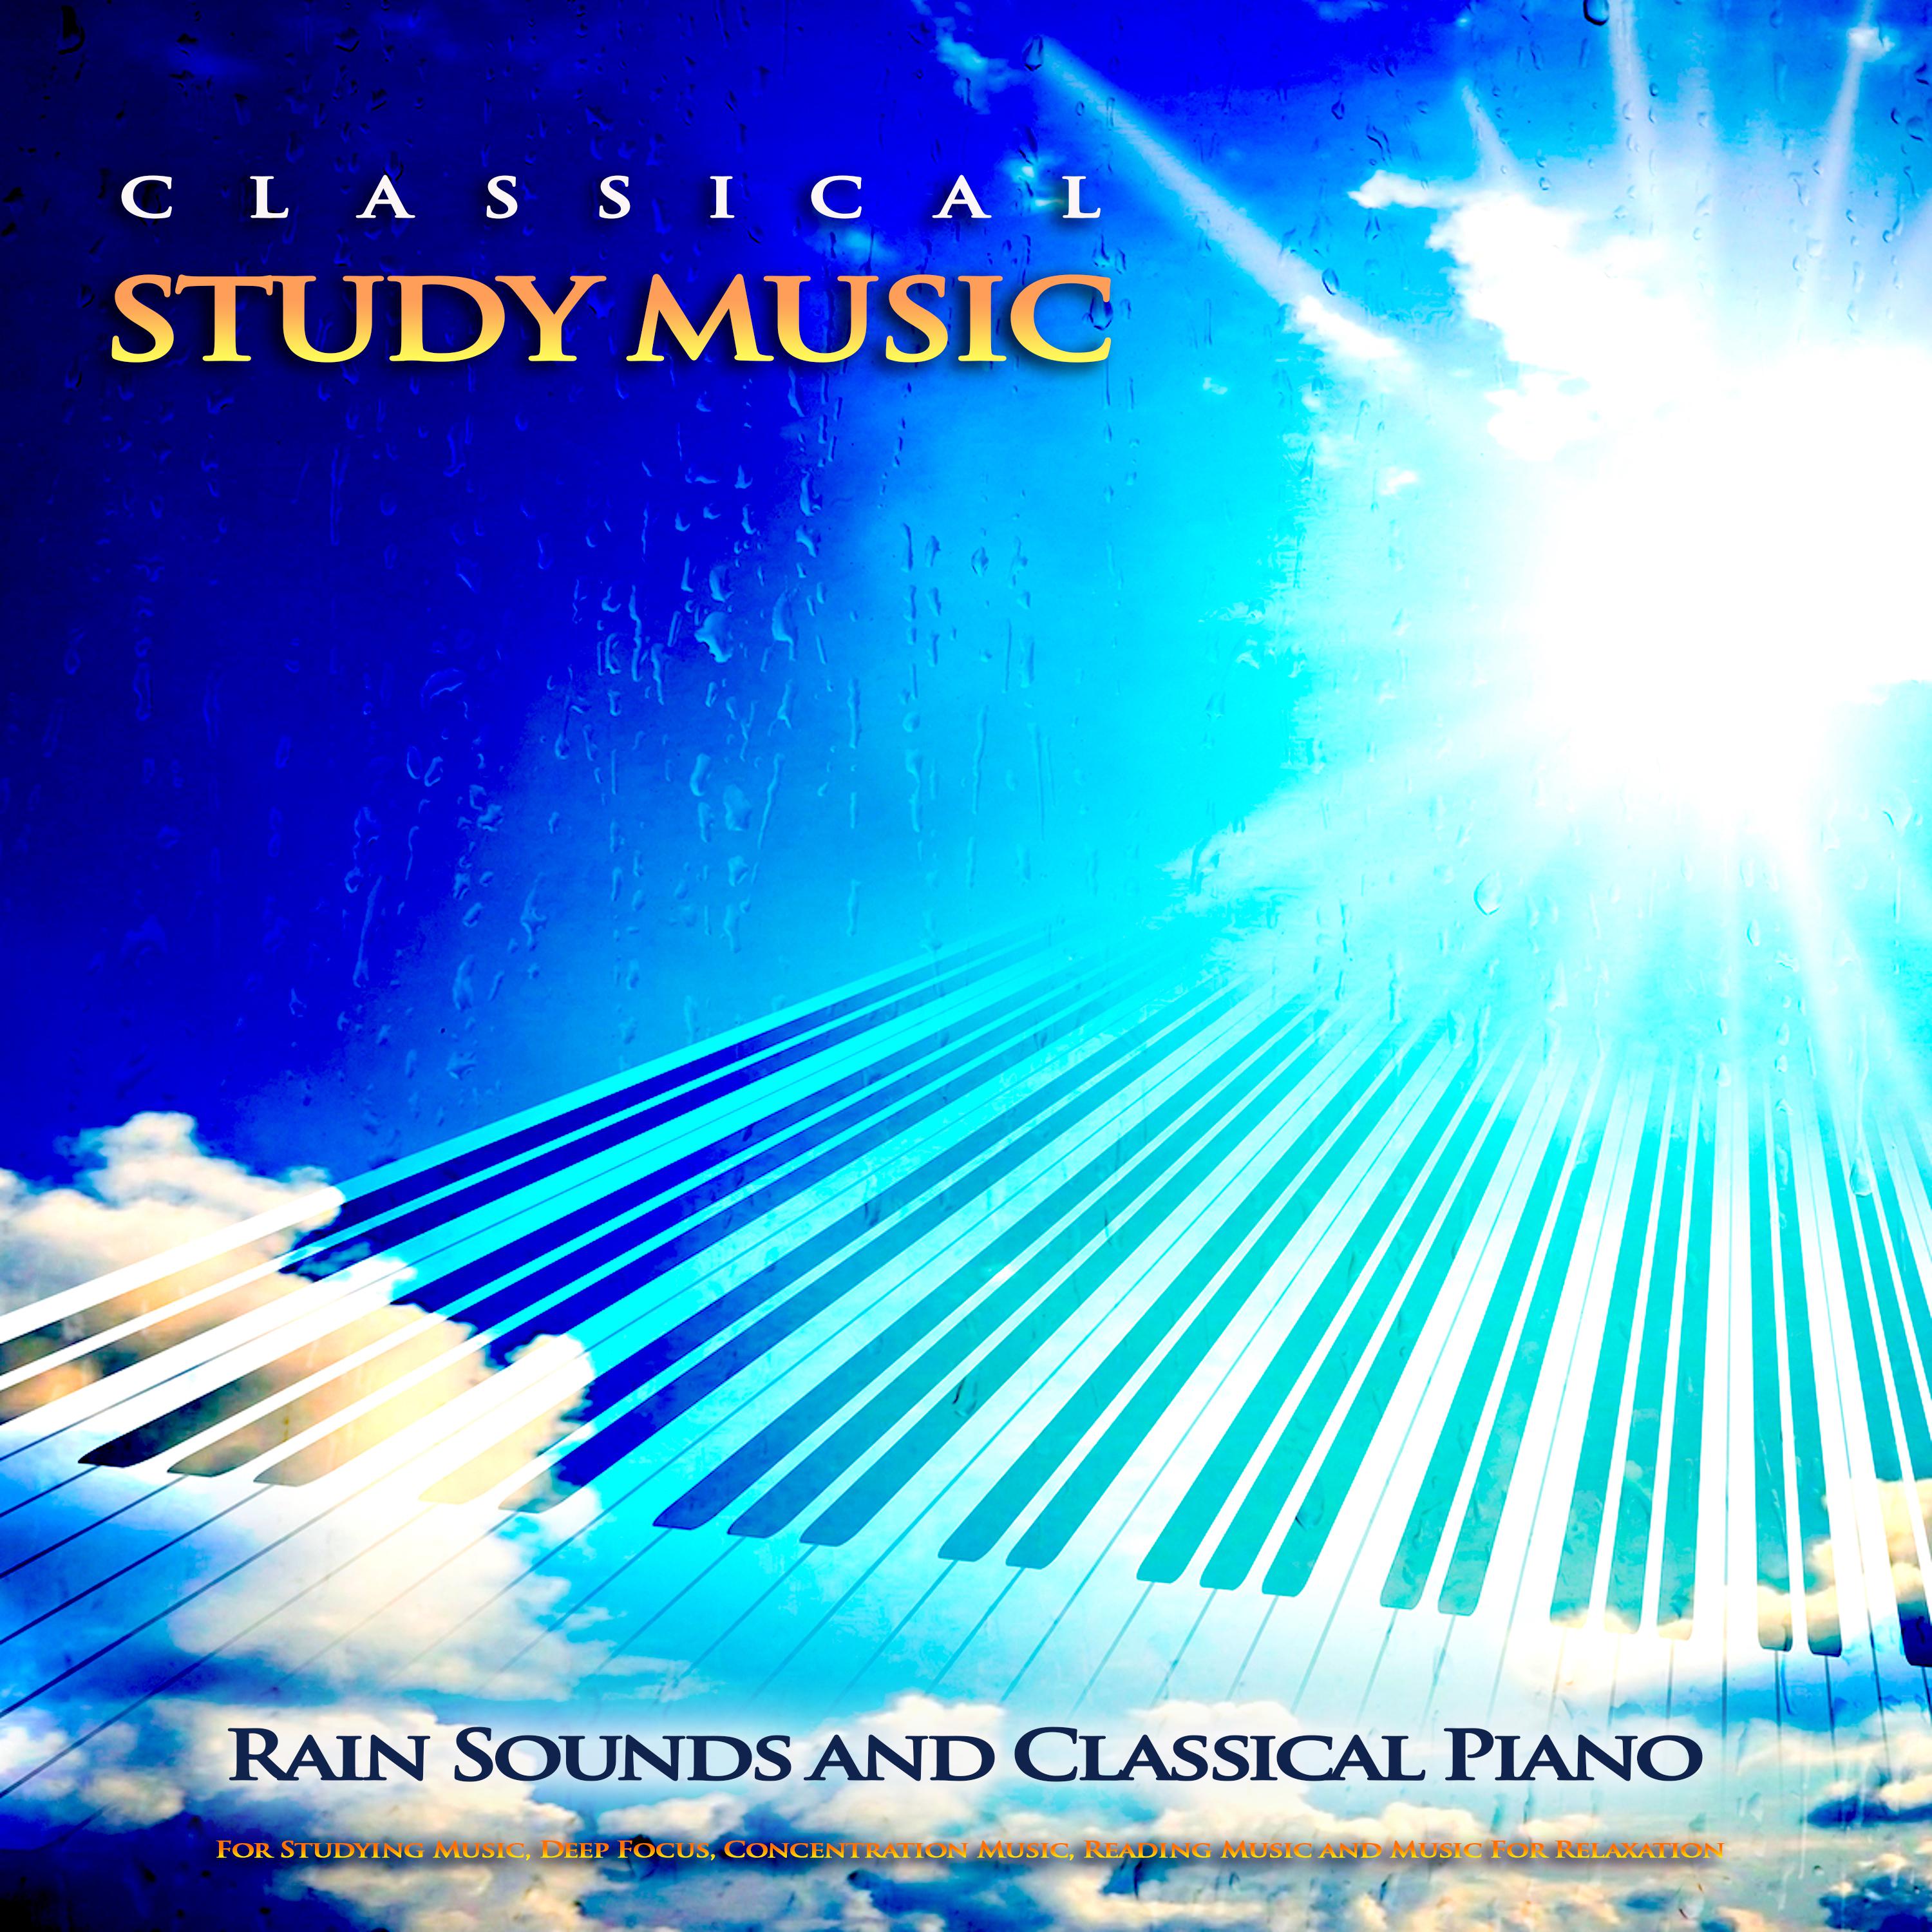 Berceuse - Chopin - Classical Piano Music and Rain Sounds - Classical Studying Music